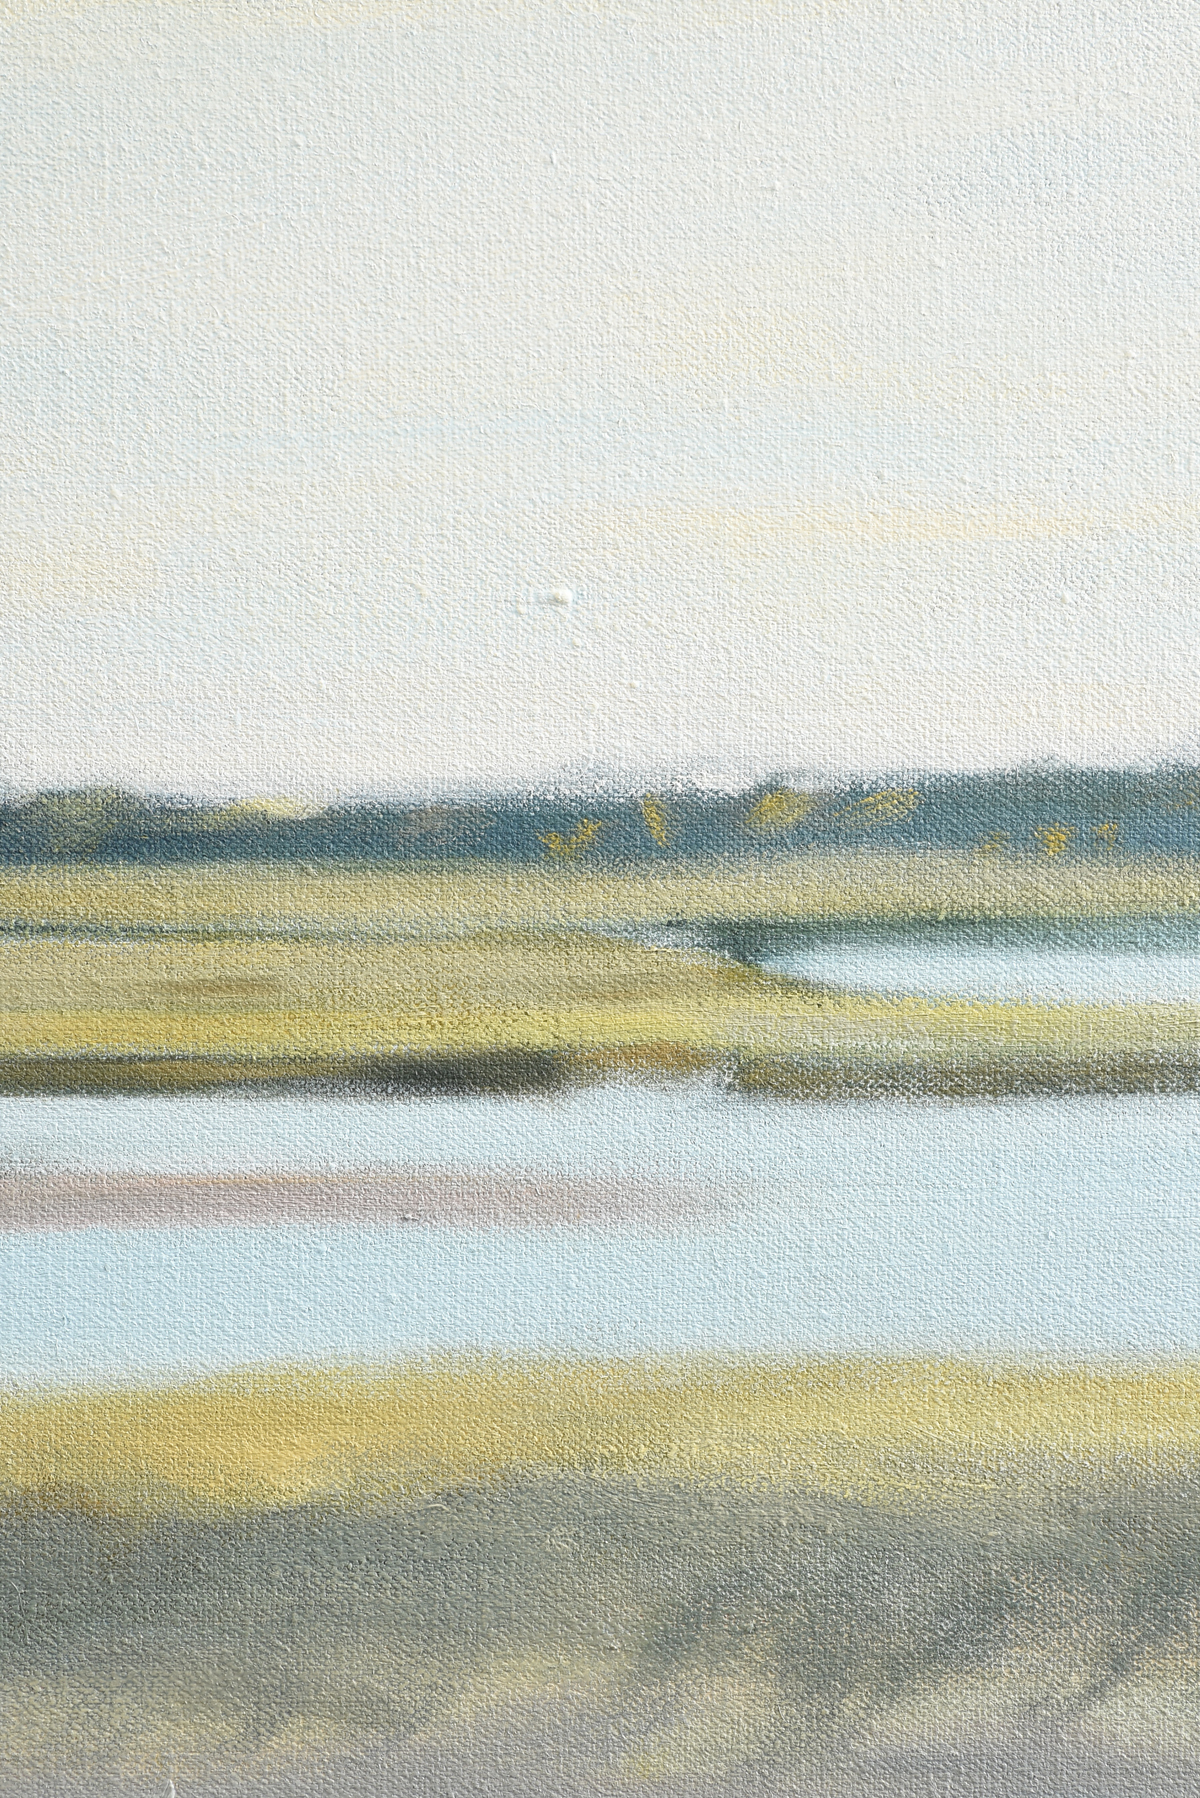 GAIL KERN (American 20th/21st Century) A PAINTING, "Marshland in Landscape," oil on canvas, signed - Image 4 of 15